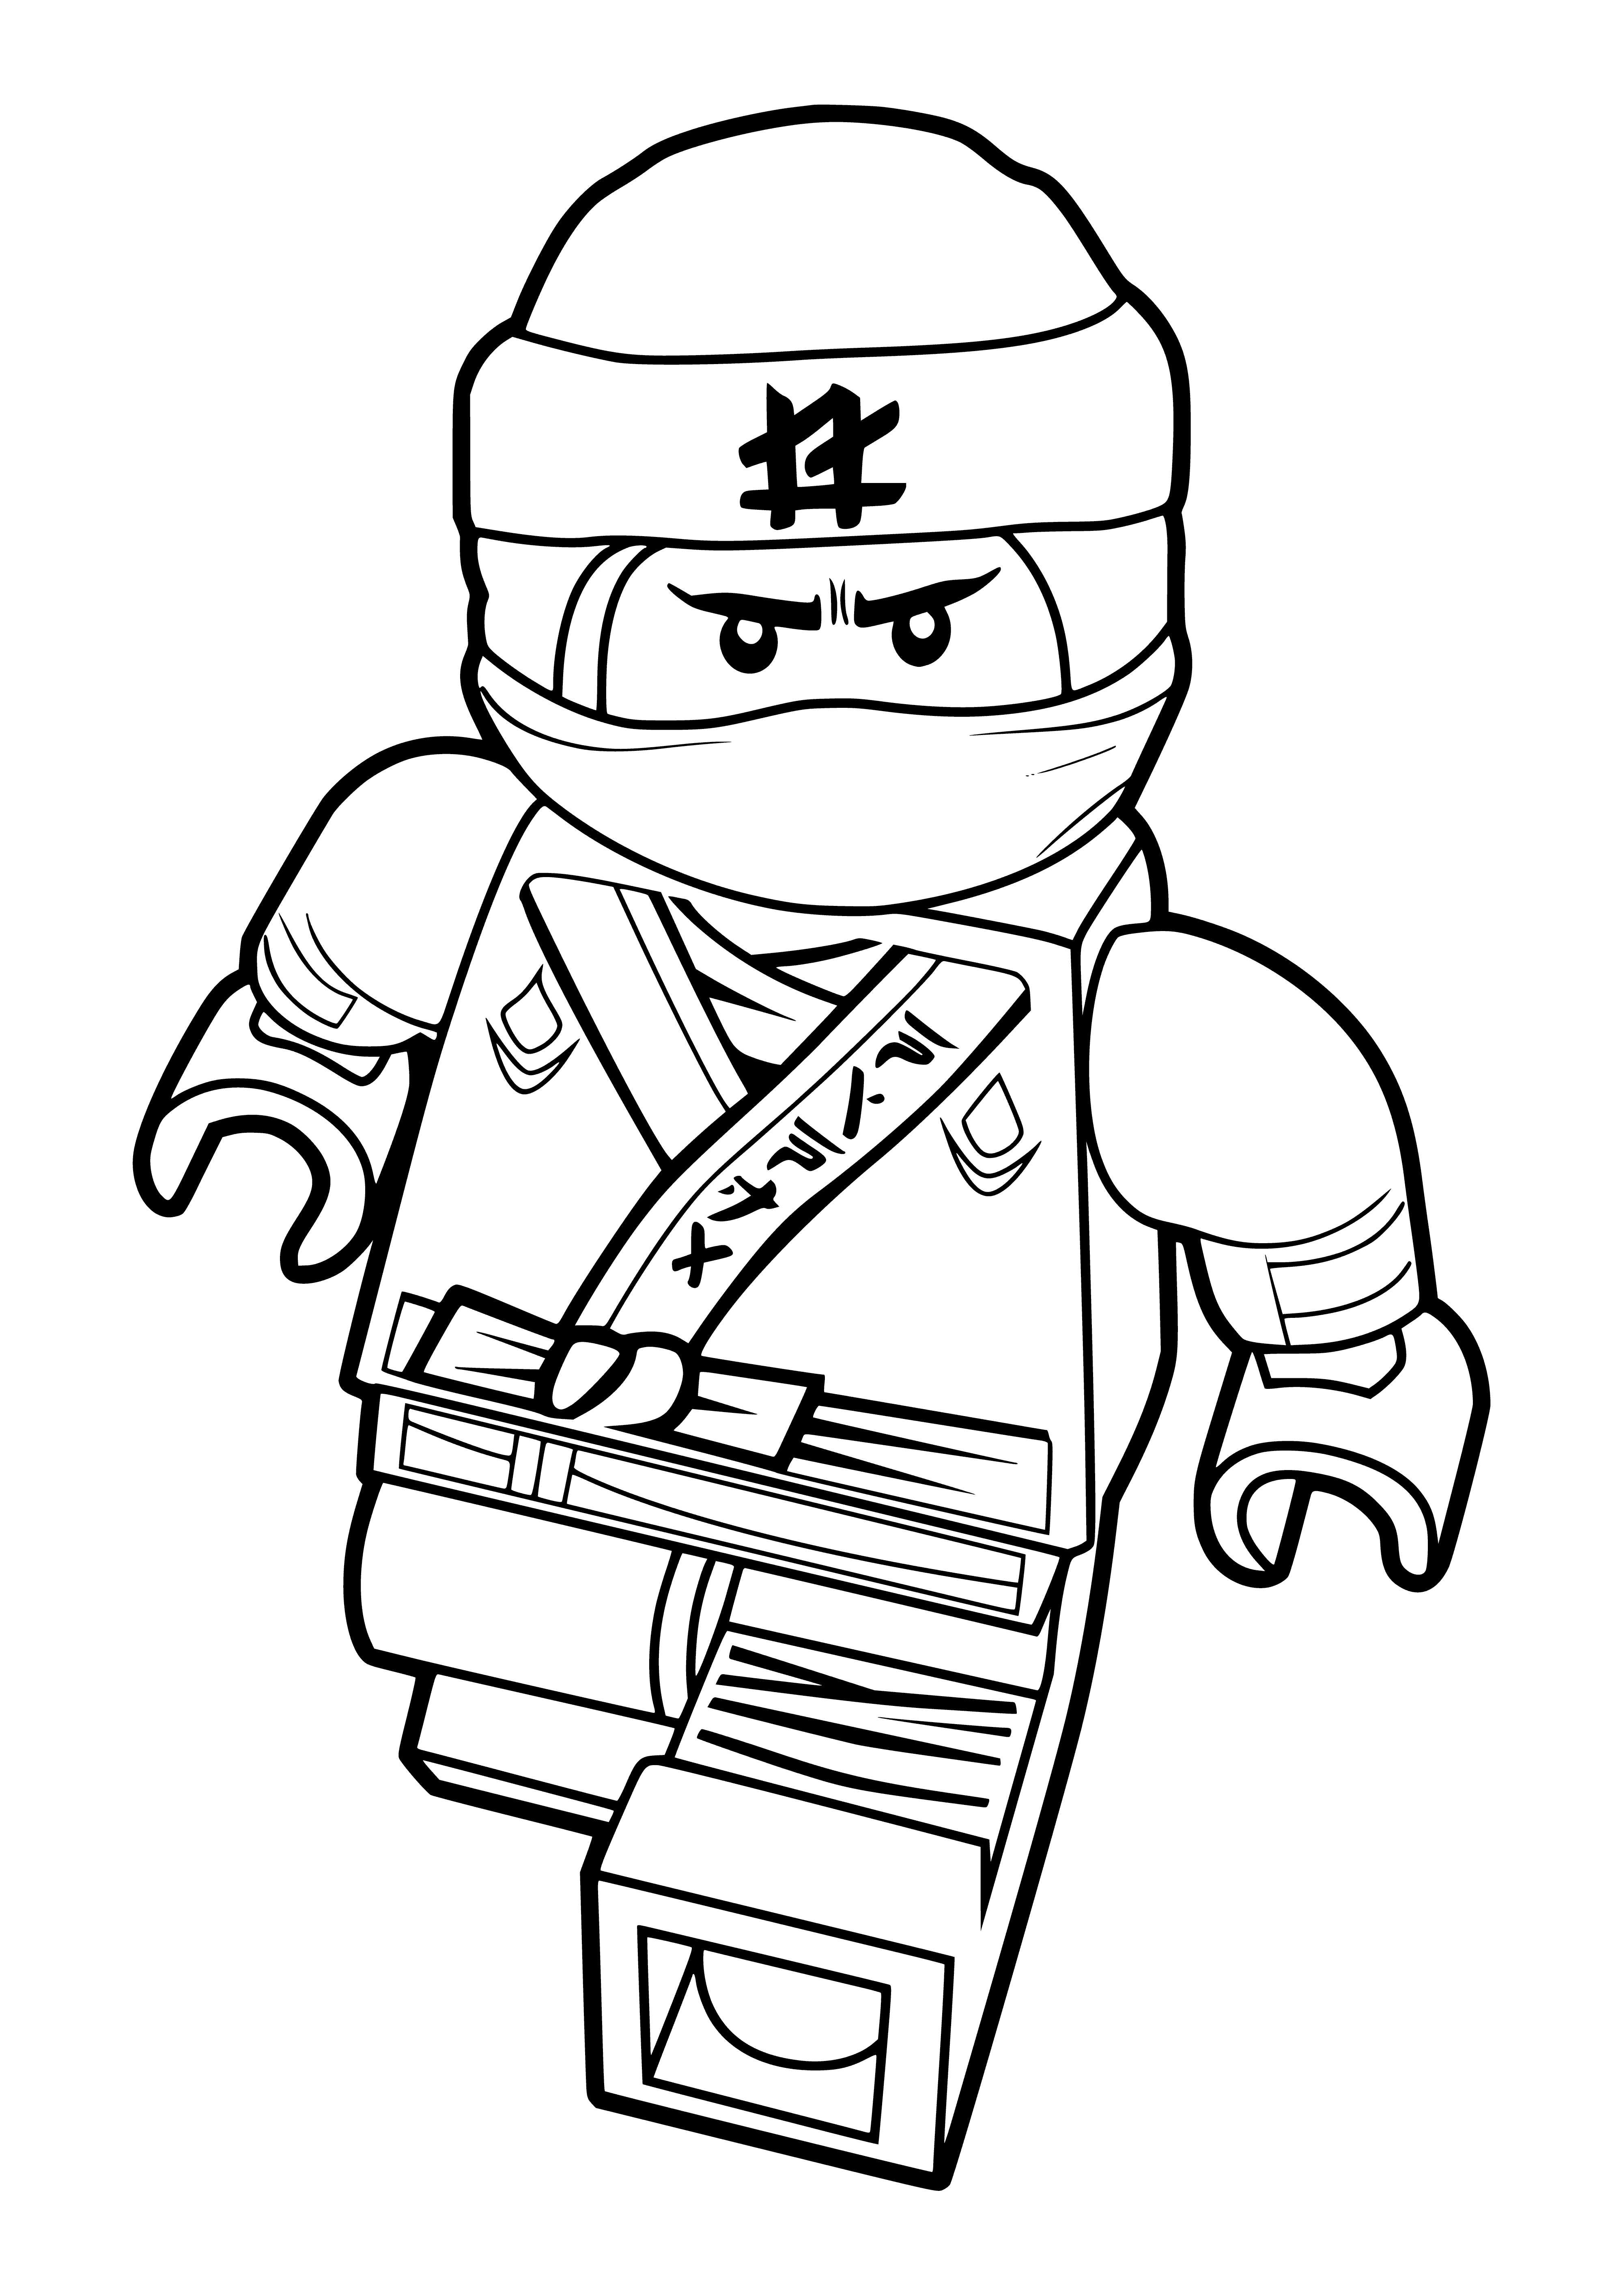 coloring page: Ninjas with unique weapons on top of a mountain, ready to fight a horde of medieval warriors attacking a castle. #ninja #warriors #castle